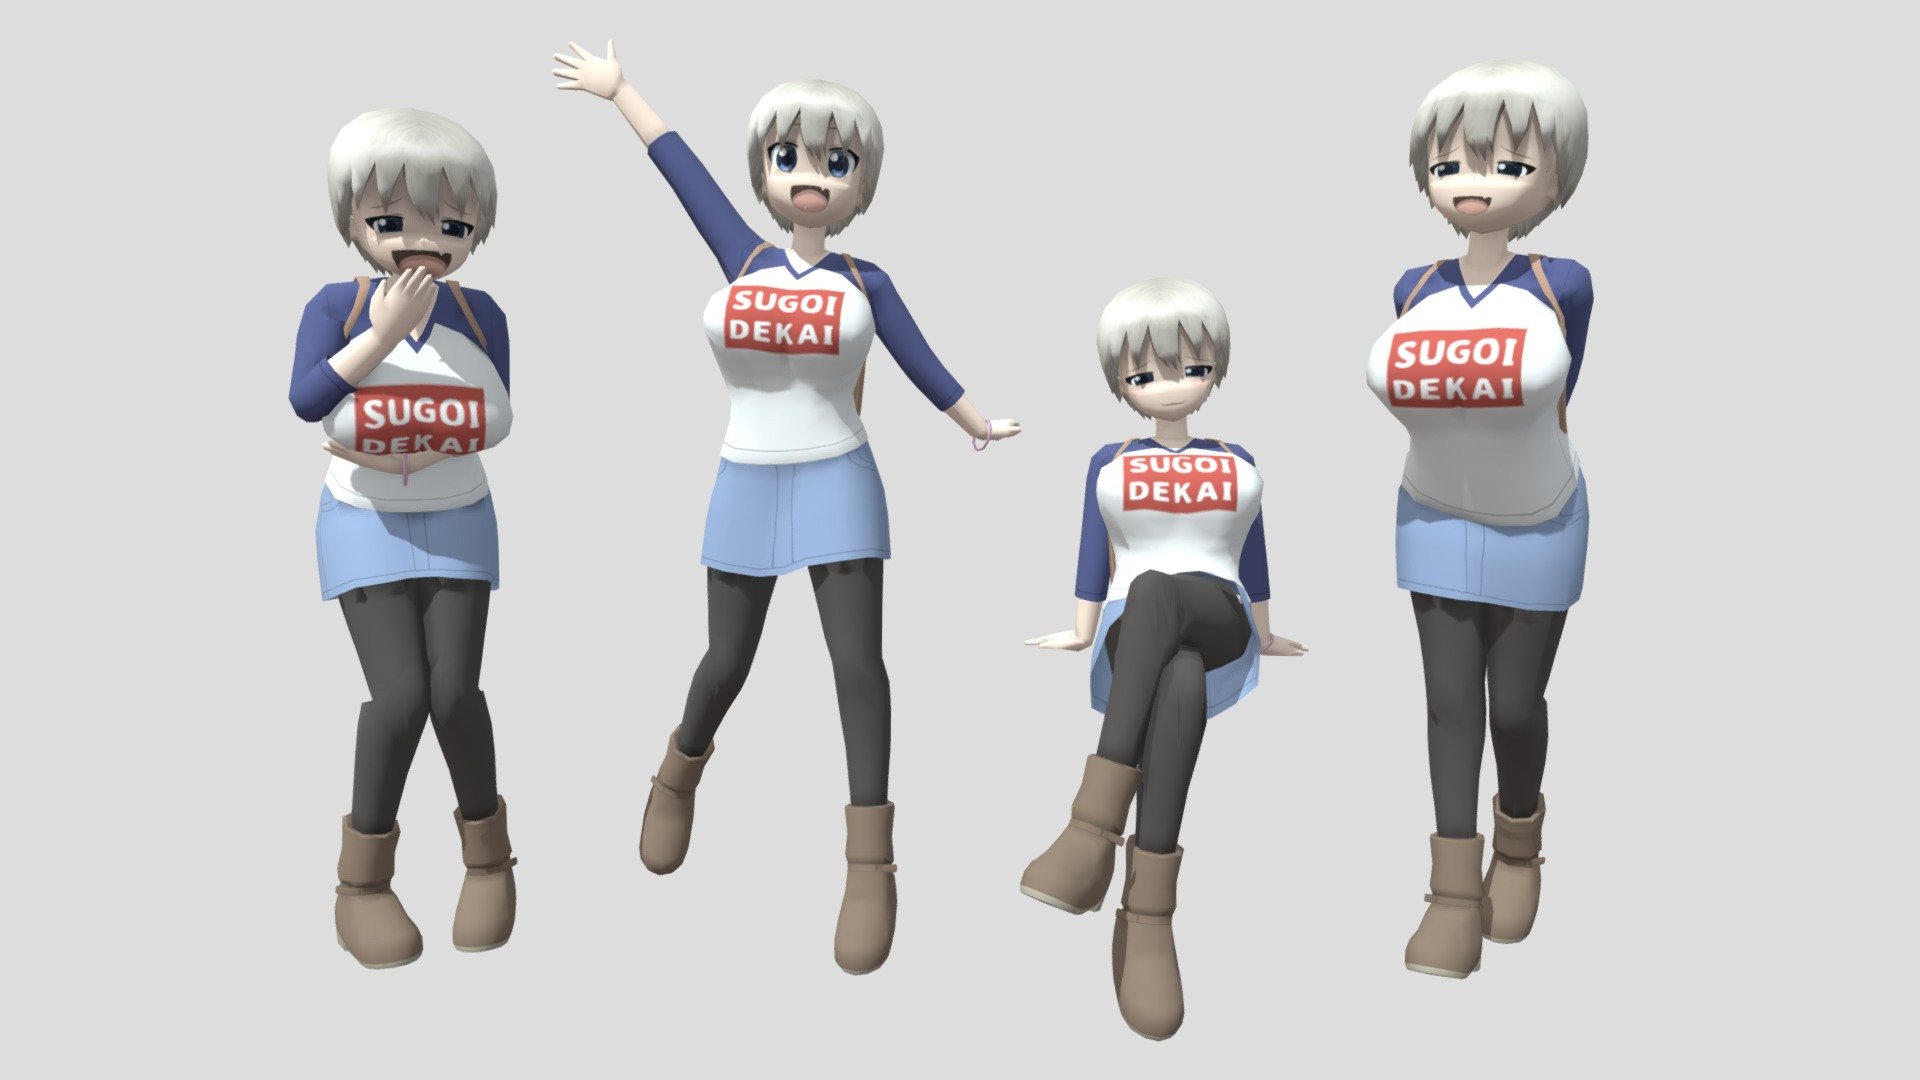 Uzaki-chan from Uzaki-chan Wants to Hang Out. I tried my best to make her model as accurate as possible.

Also, if you play Cities: Skylines, you can download a citizen and prop version of her from the workshop.

https://steamcommunity.com/sharedfiles/filedetails/?id=2202829527 - Uzaki-chan - 3D model by Nosh59 3d model